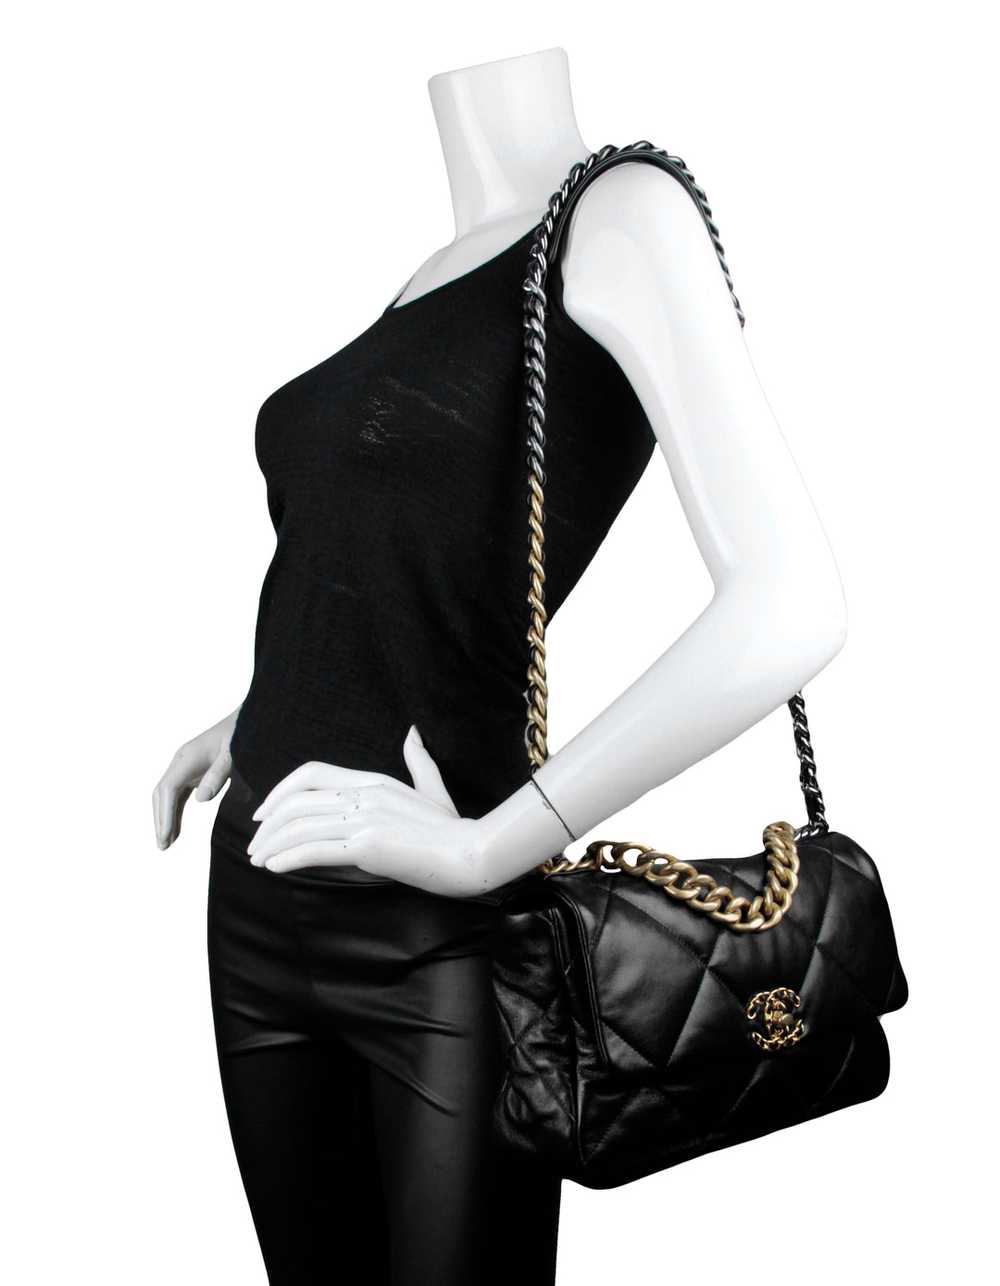 Chanel Black Lambskin Leather Quilted Large 19 Bag - image 2